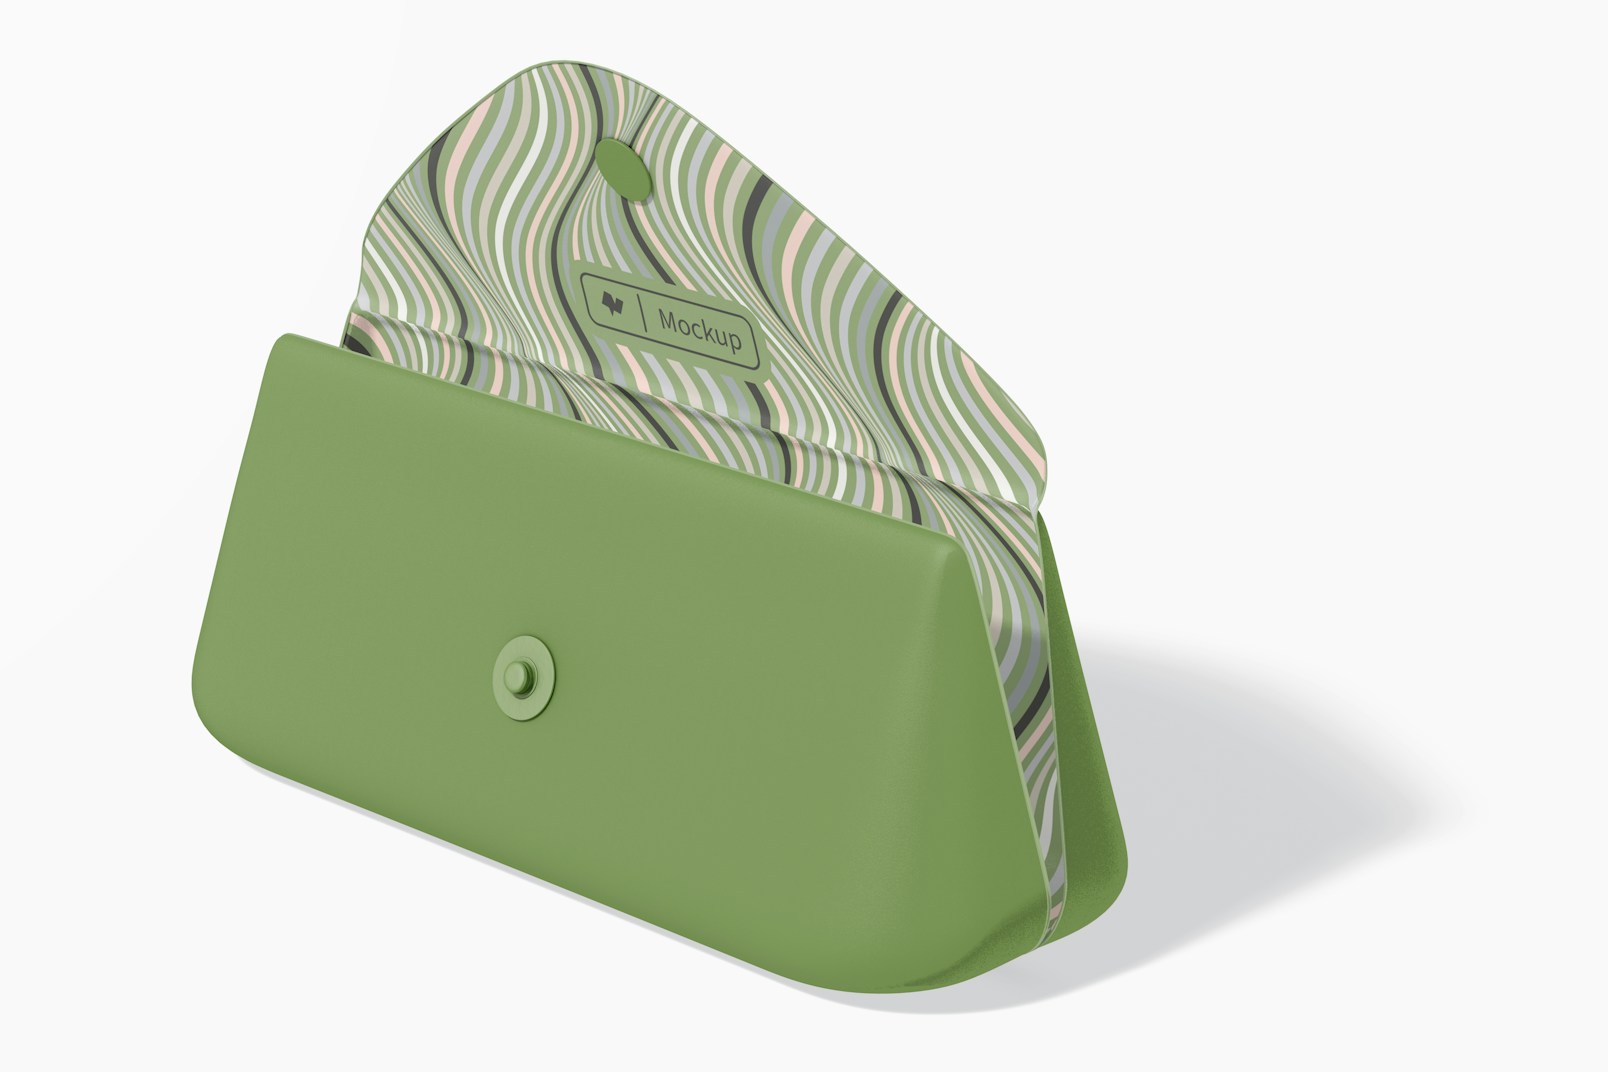 Protective Sunglasses Case Mockup, Side View